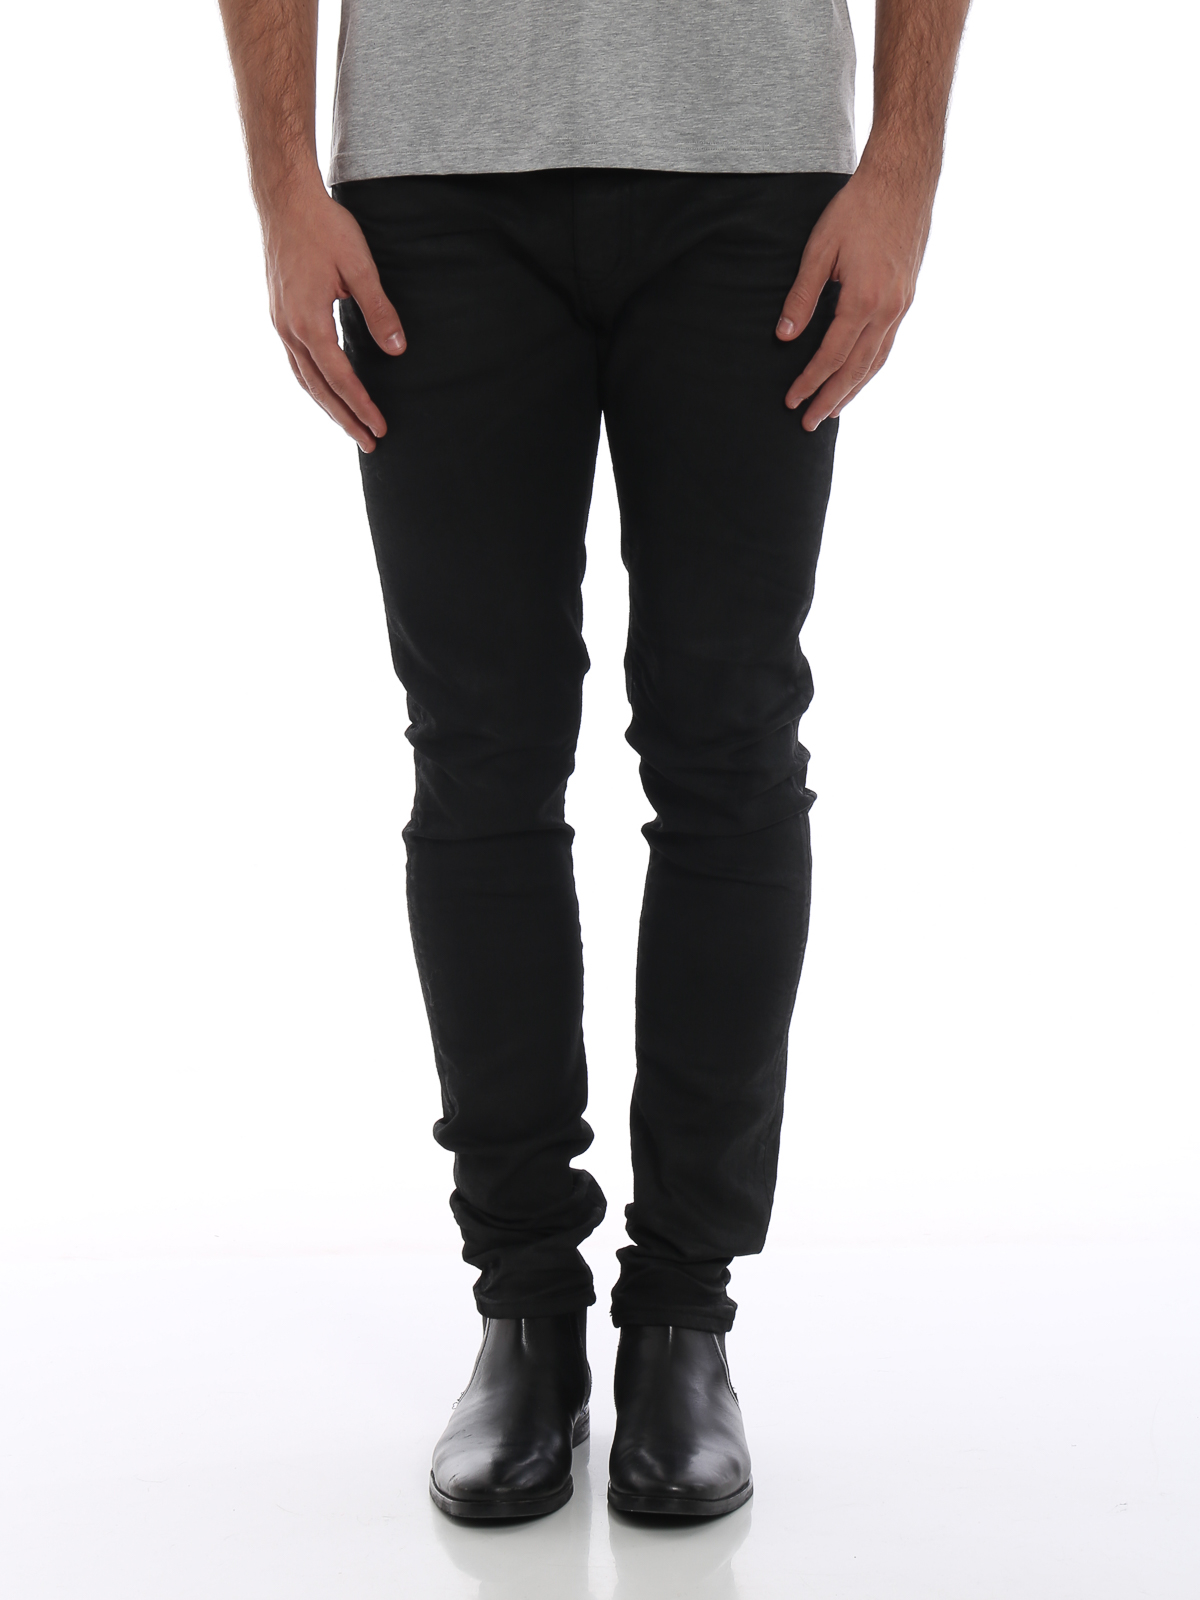 Father fage Royal family jam saint laurent skinny jeans Voluntary ...